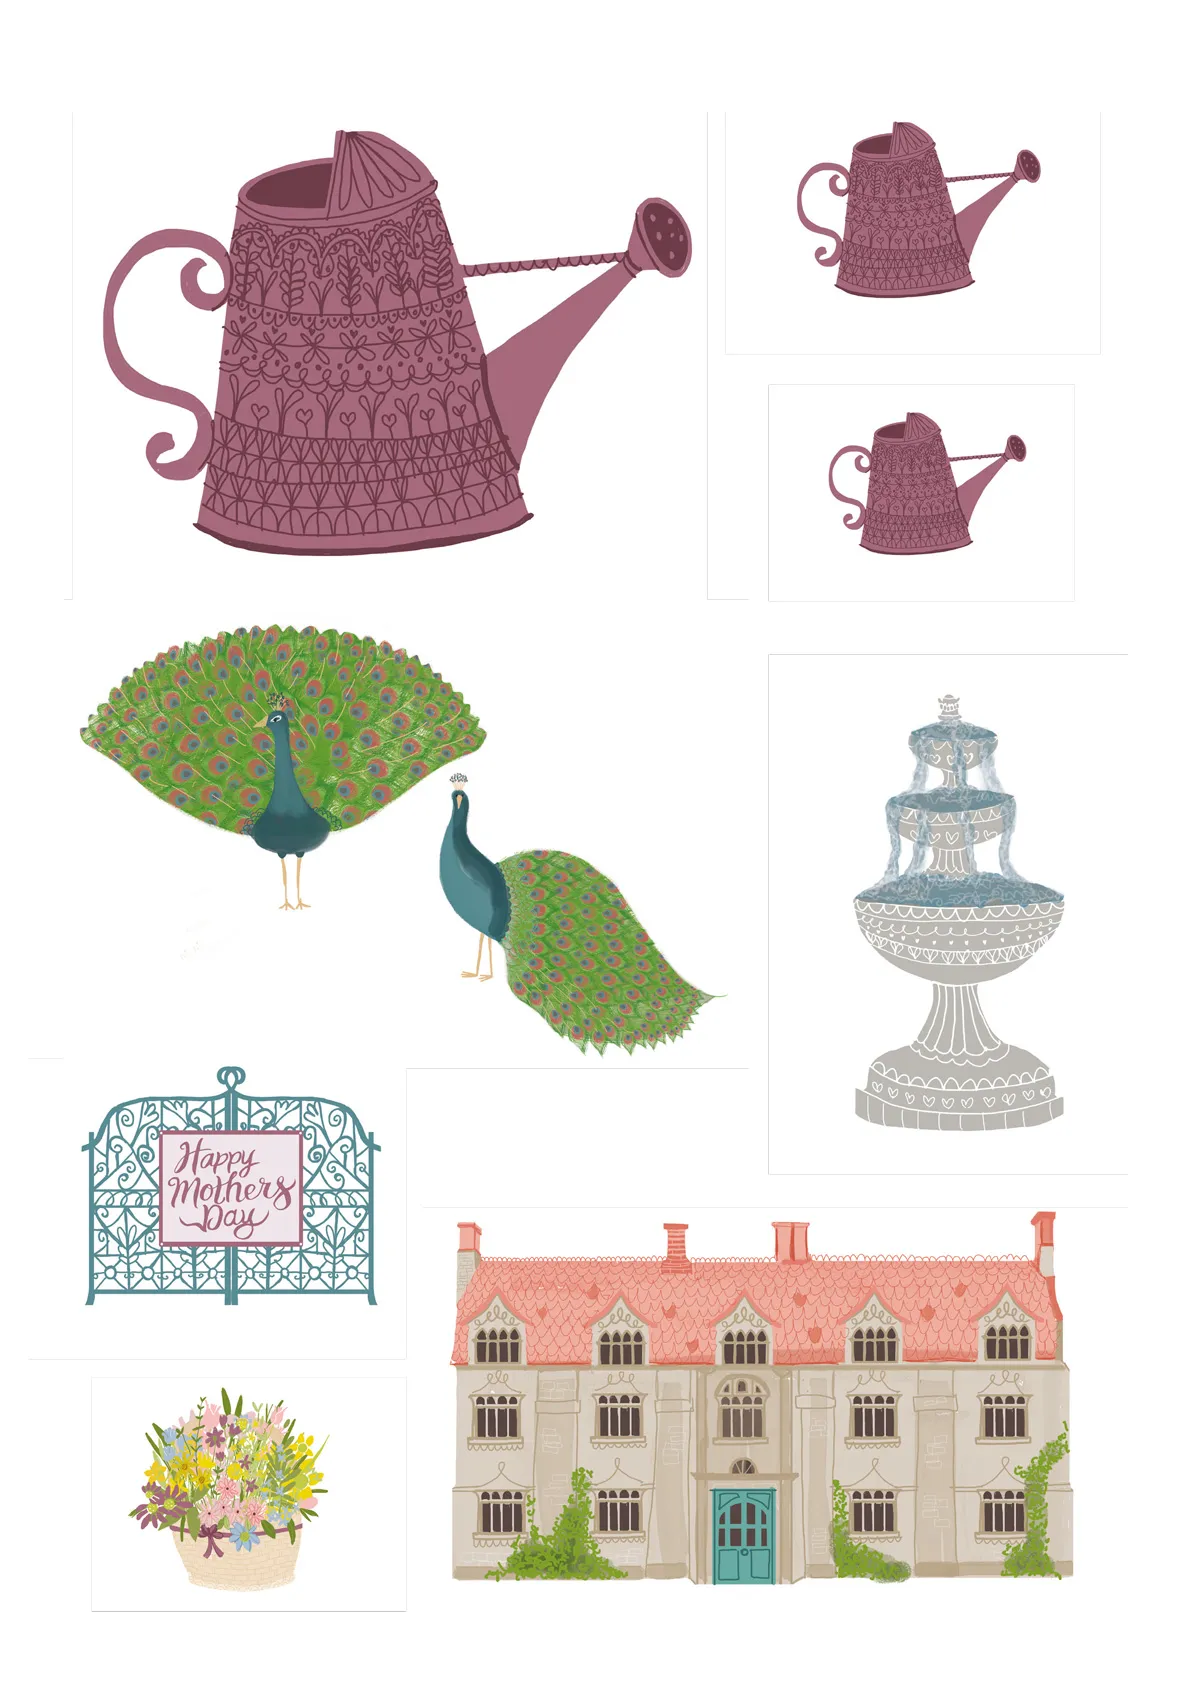 Free country manor house patterned papers 13